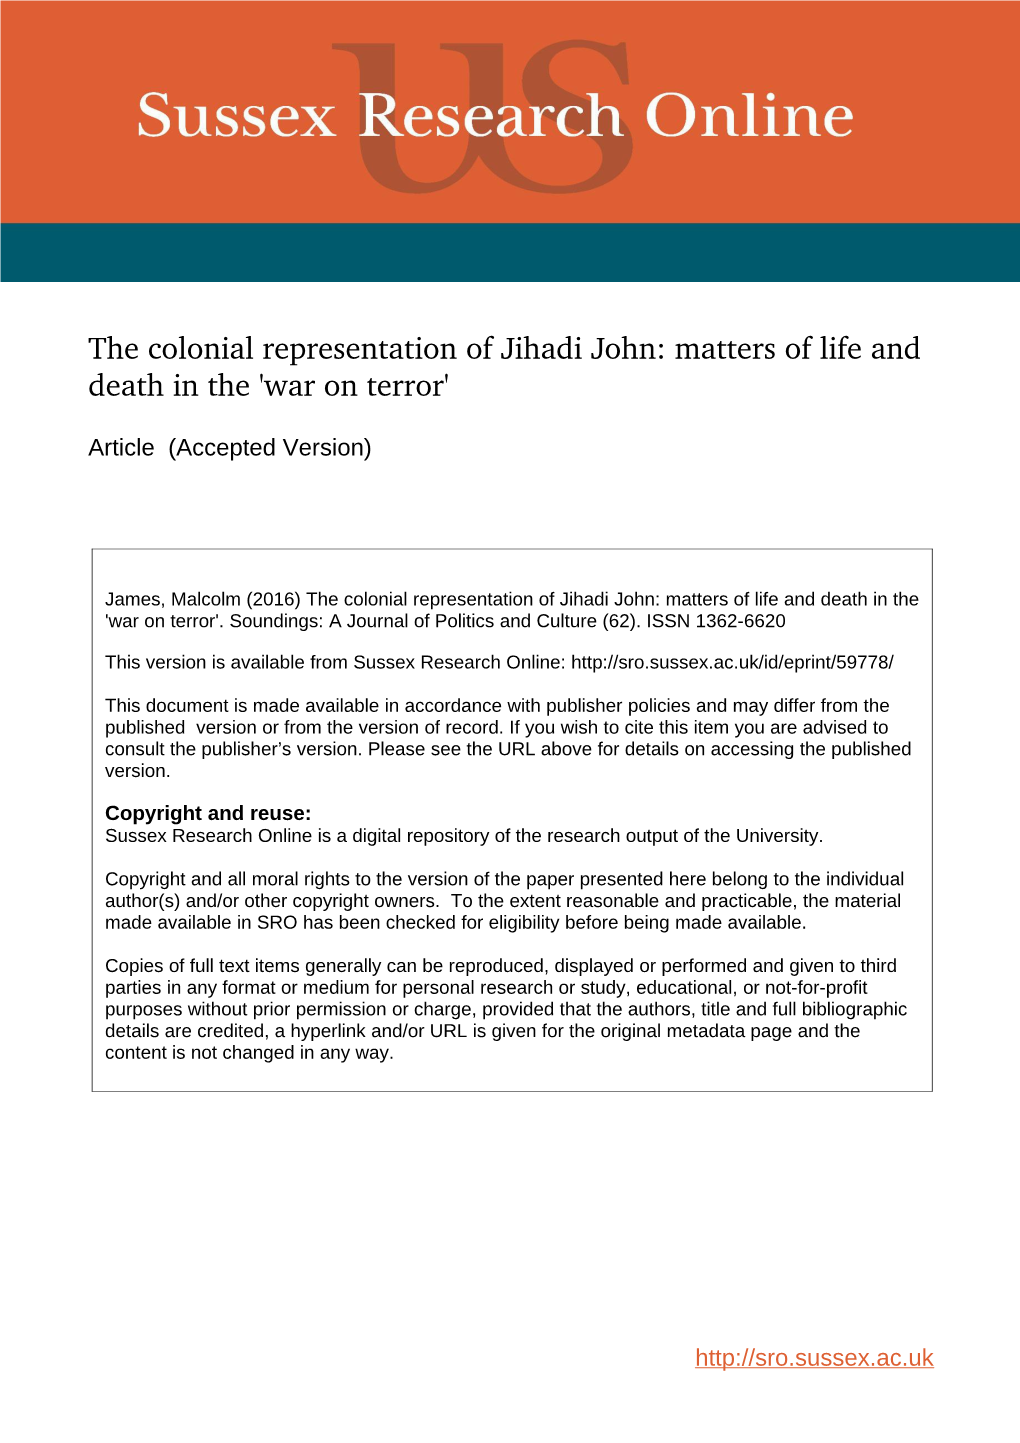 The Colonial Representation of Jihadi John: Matters of Life and Death in the 'War on Terror'